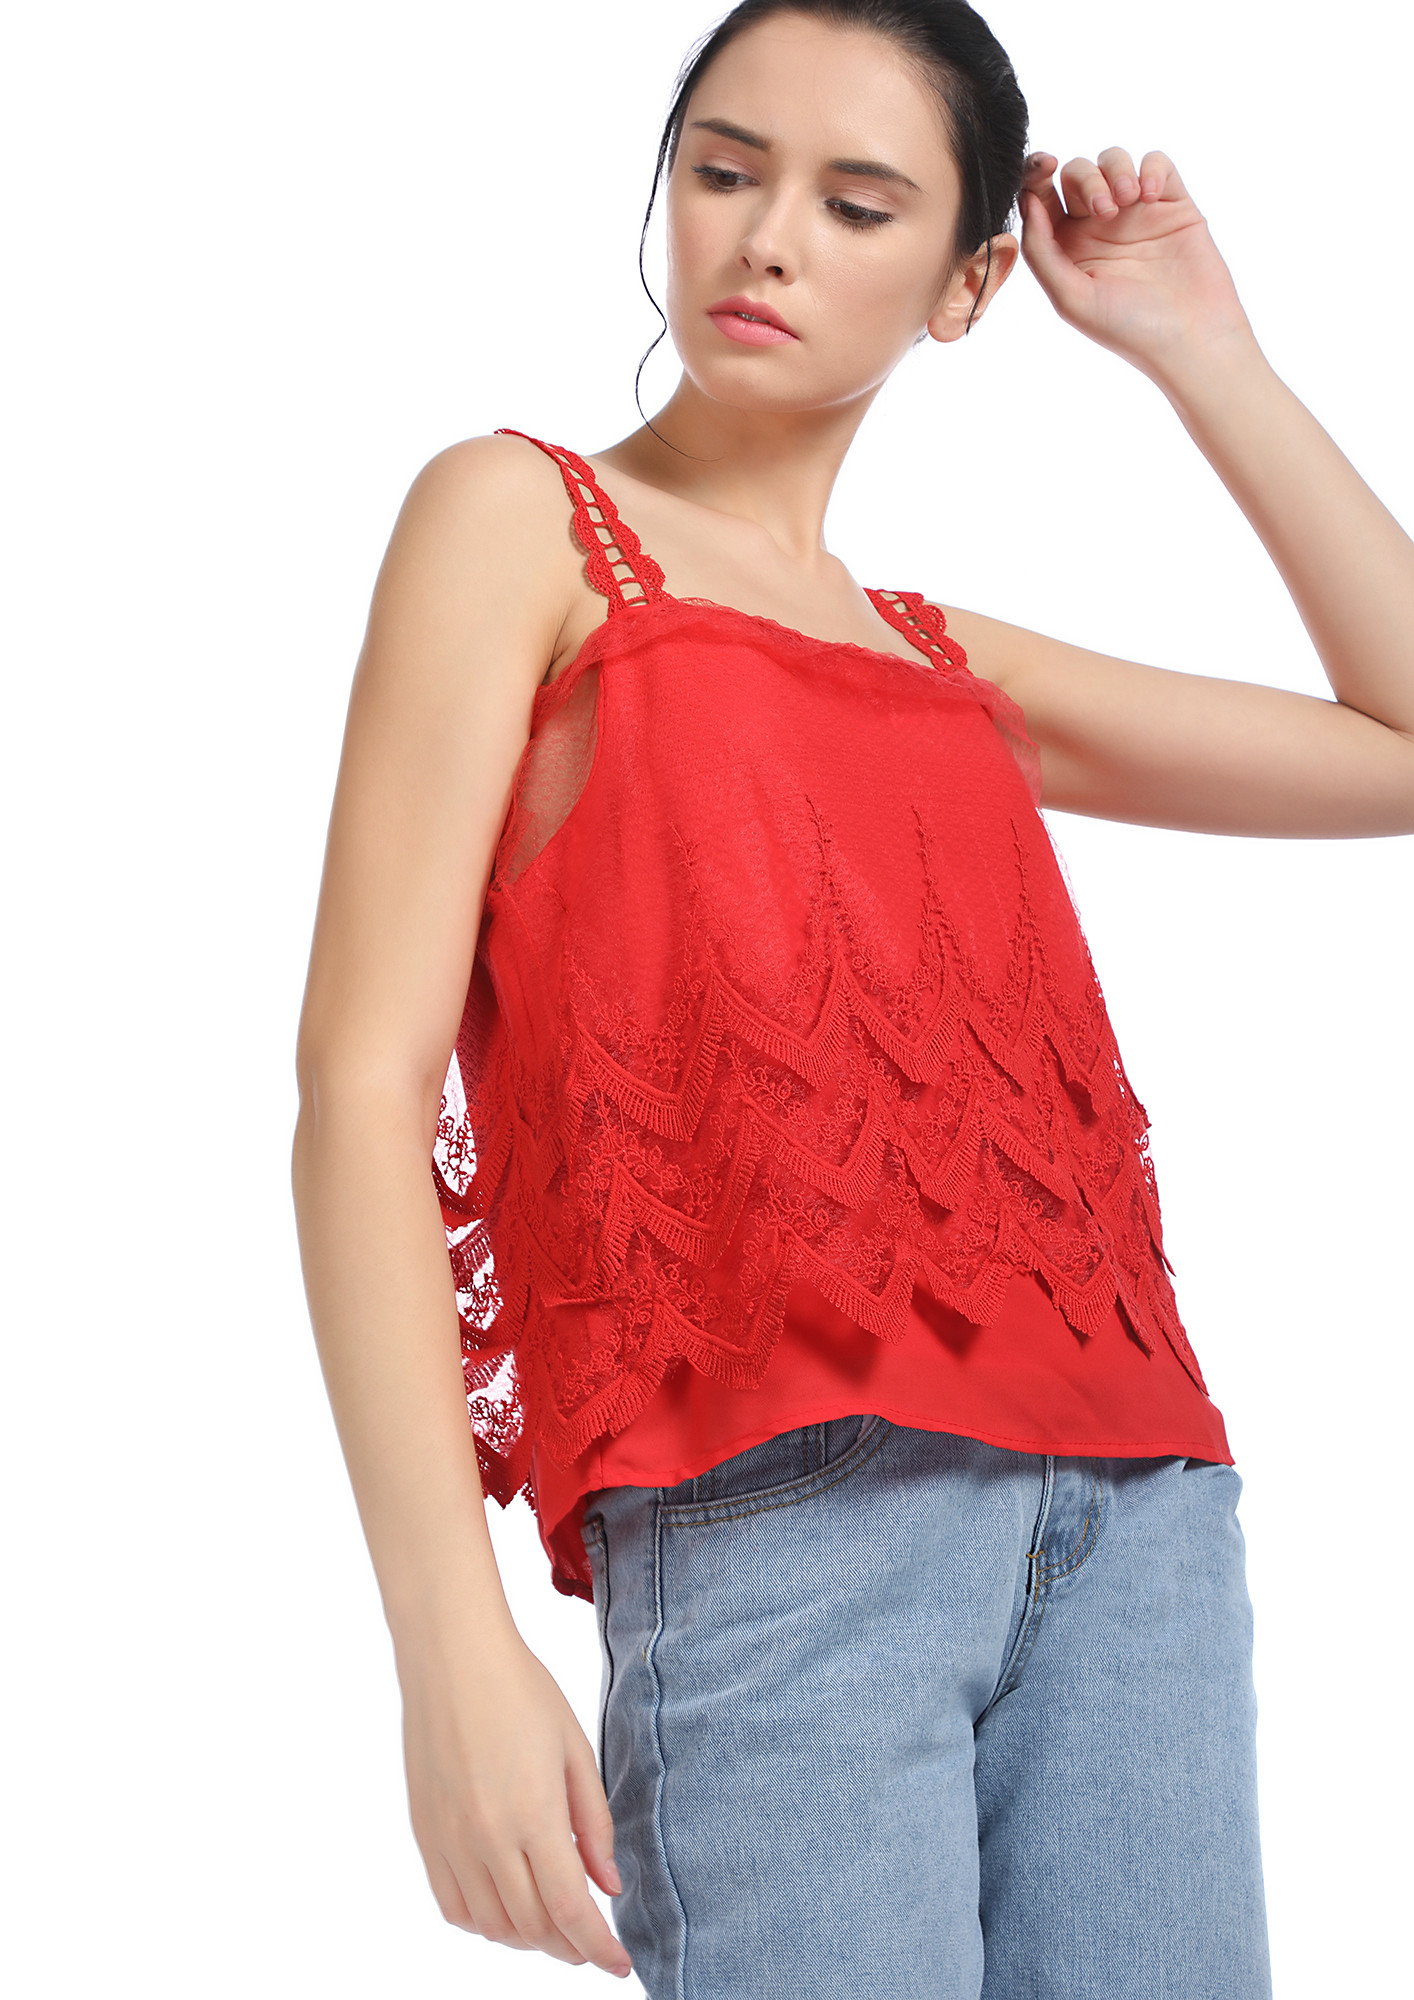 YOU'RE IN A HOT MESH RED CAMI TOP